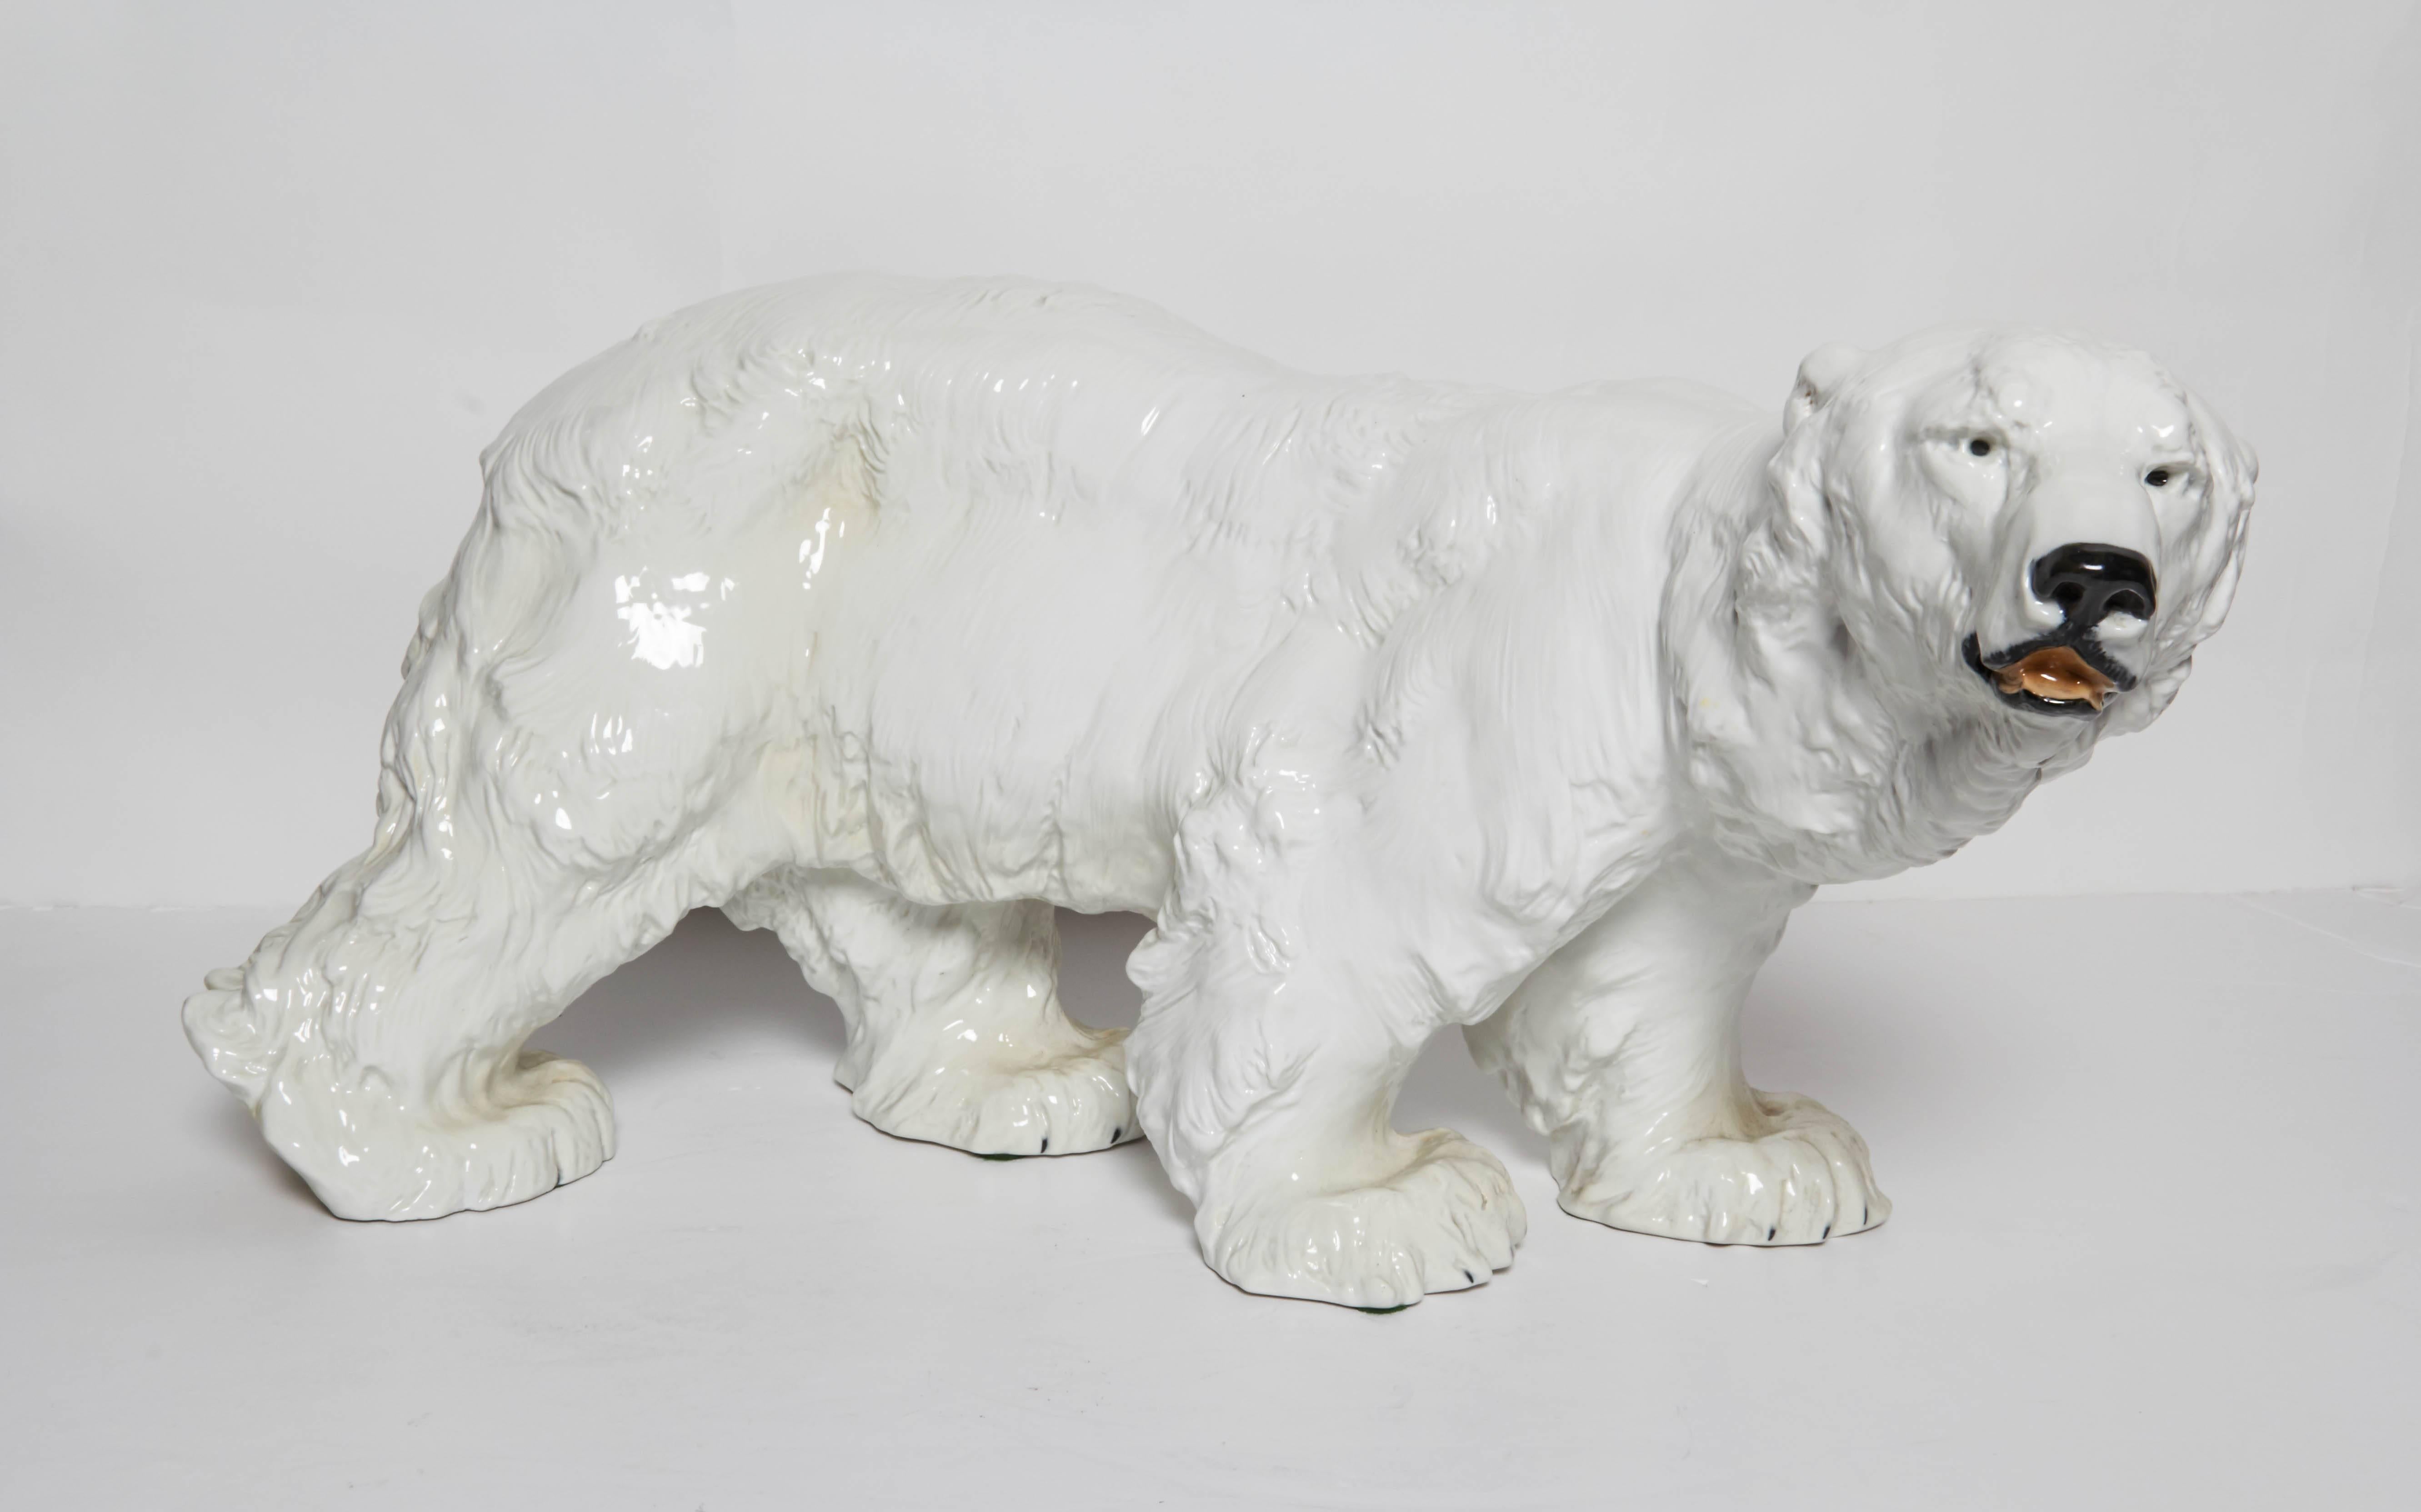 A beautiful and very large Art Deco Meissen Porcelain sculpture of a polar bear by Otto Jarl, beautifully sculpted, hand engraved and hand-painted under the glaze. Jarl, Otto (1856-1915), Austro-Swedish sculptor, studied in Stockholm and from 1881